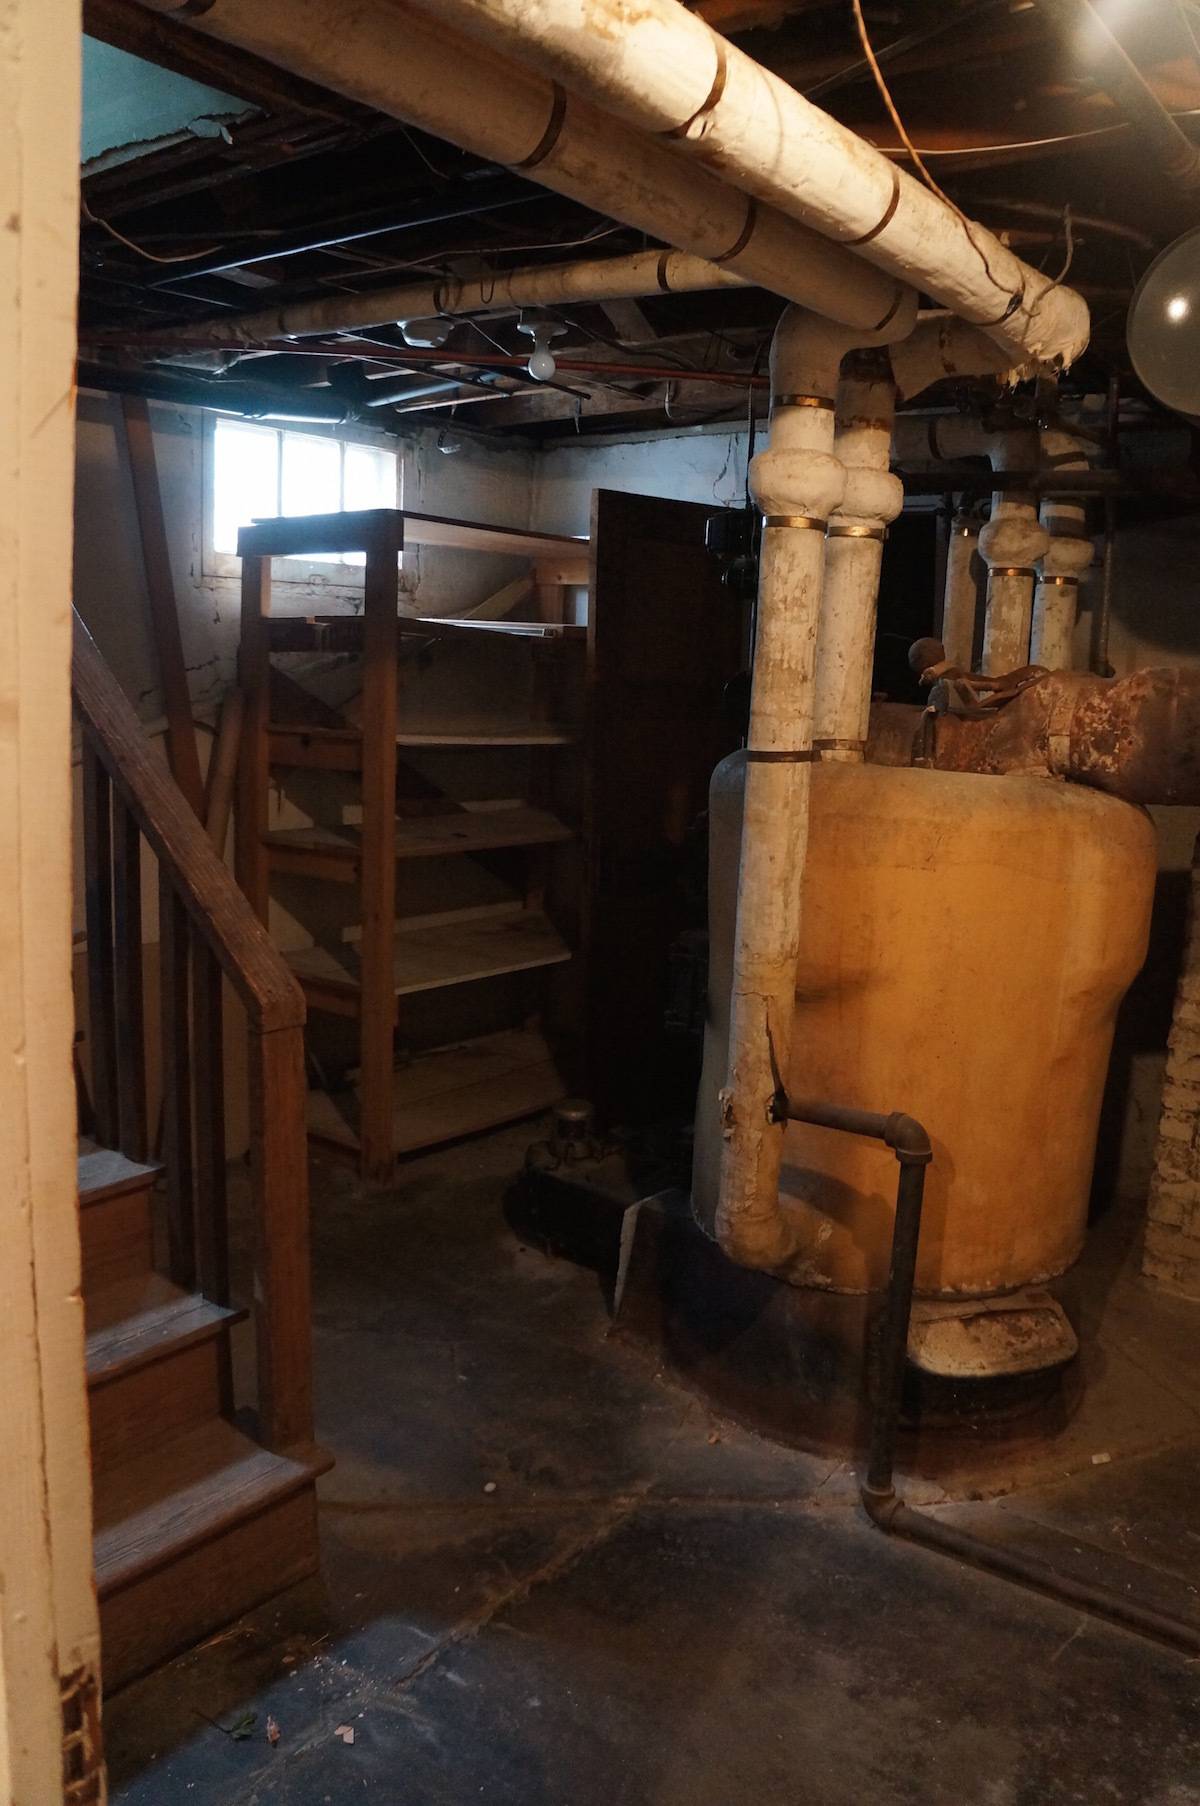 A boiler with ceiling pipes in a basement.